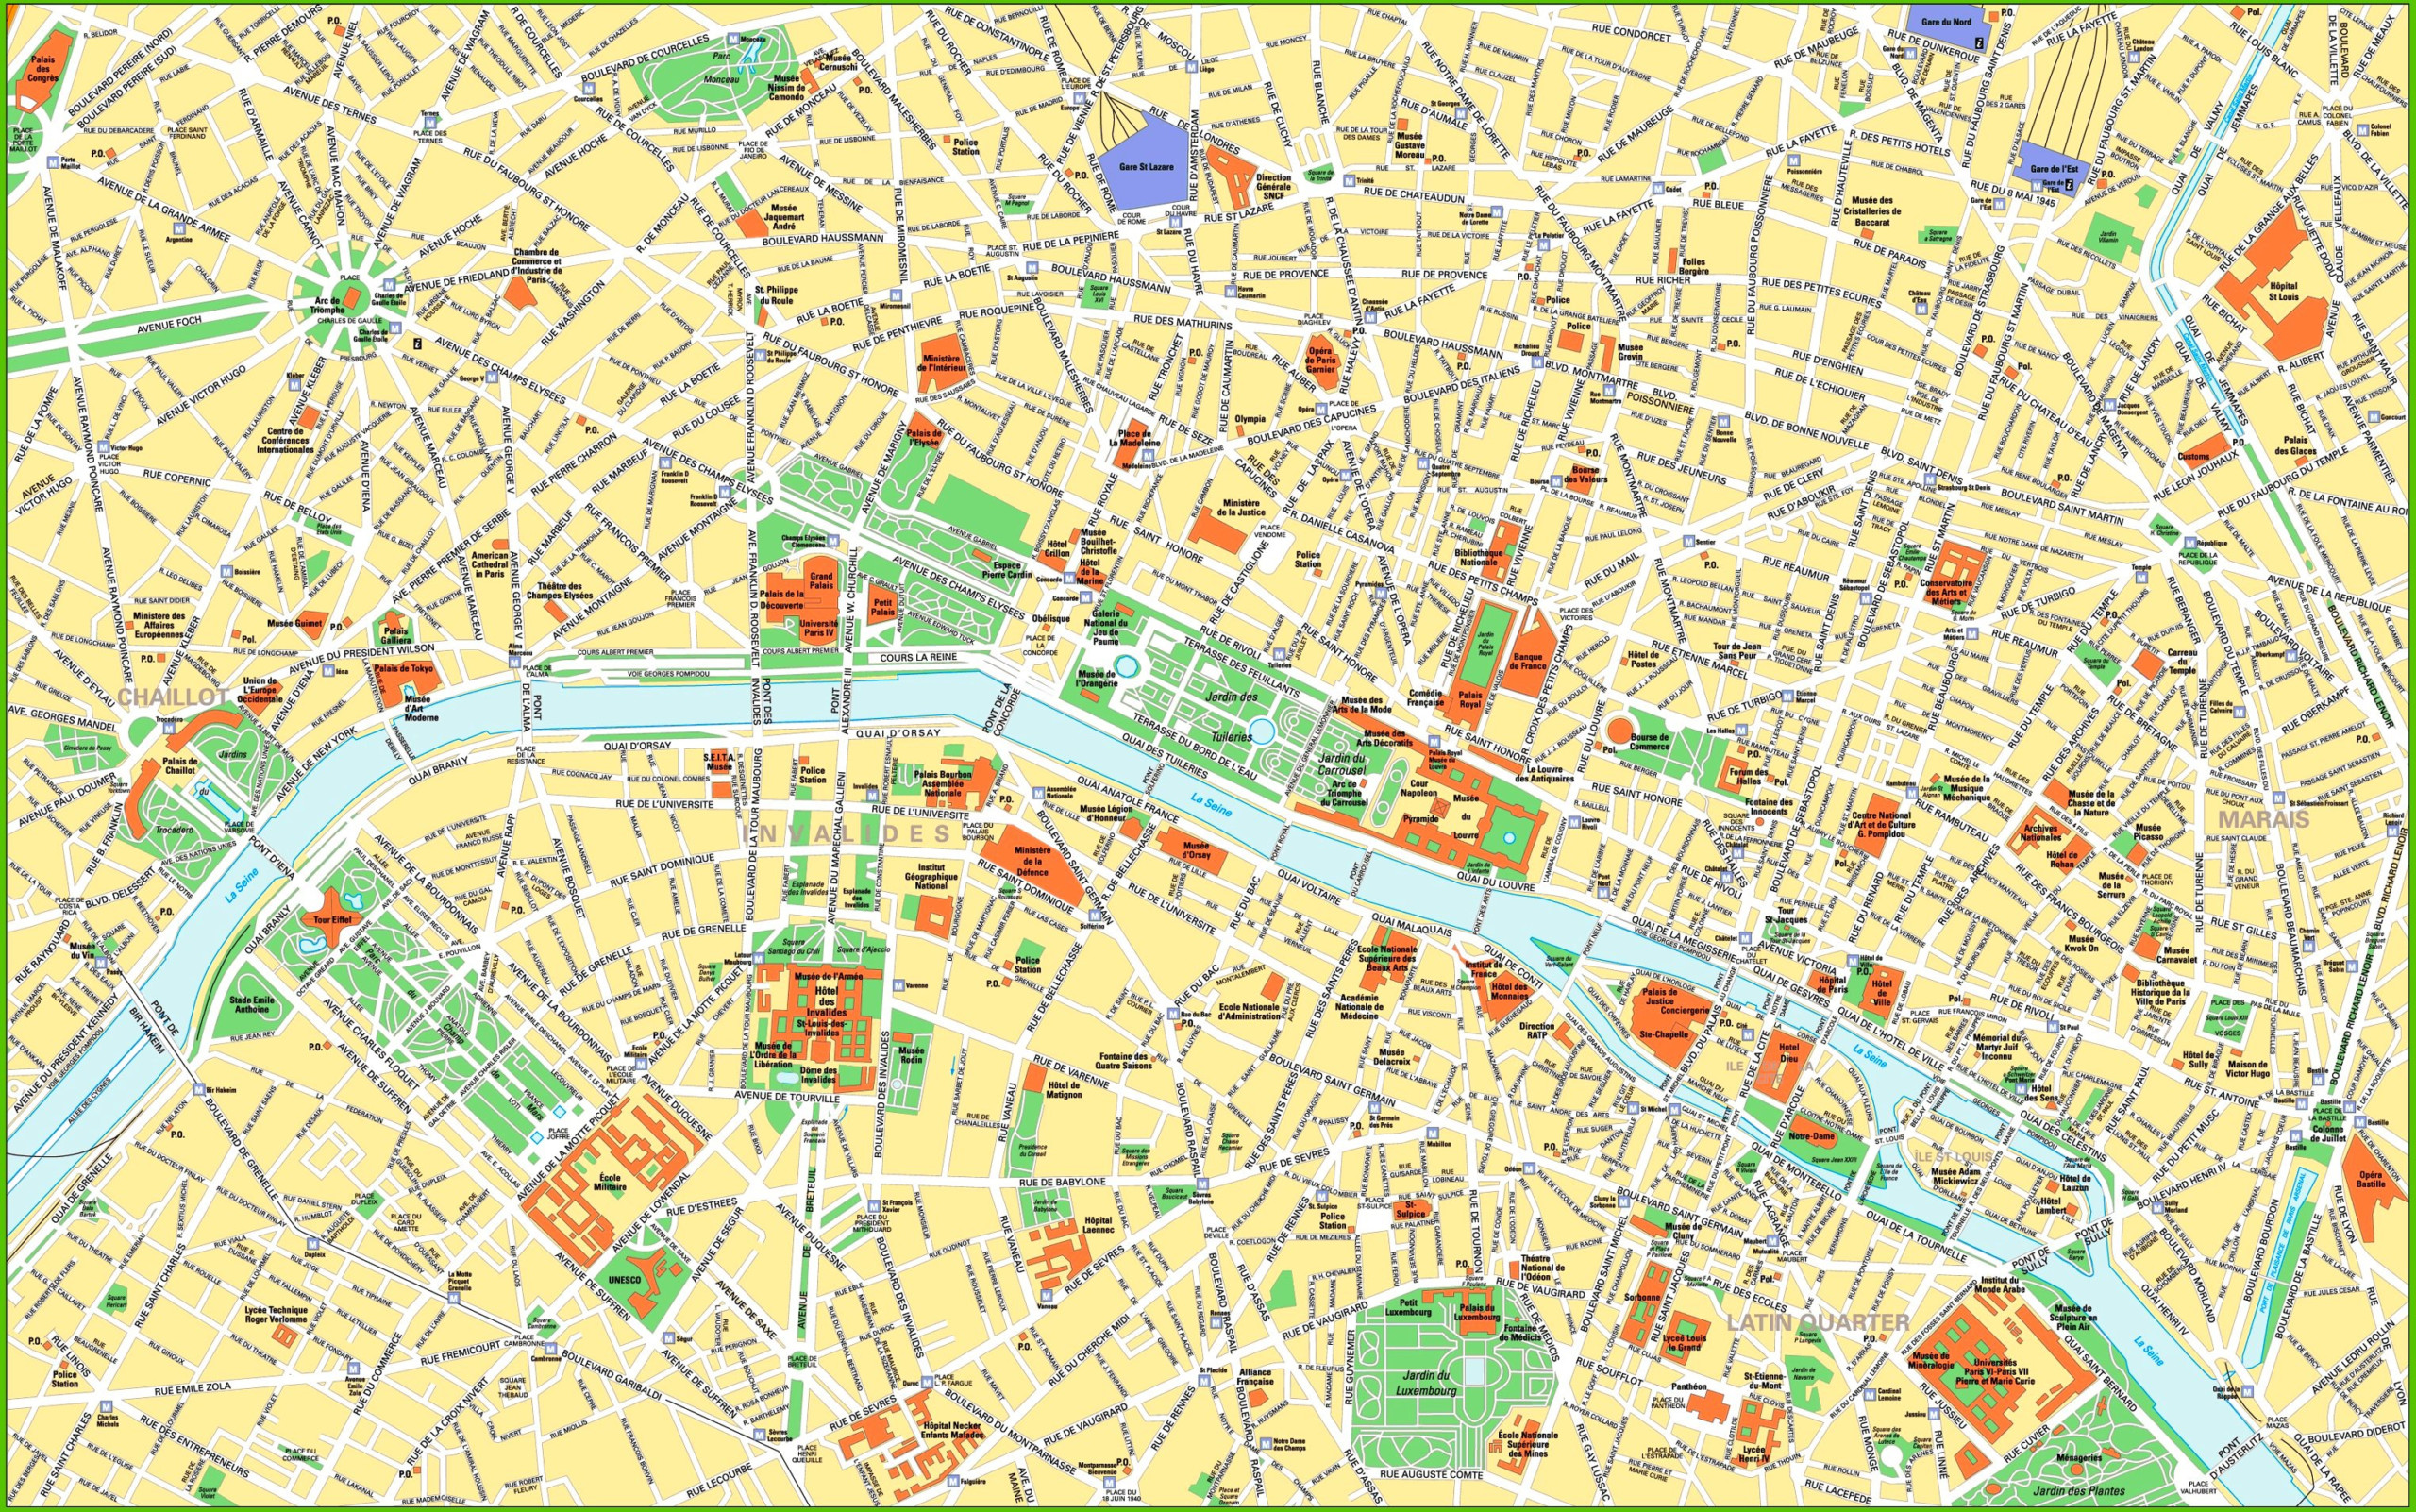 Paris City Centre Map With Tourist Attractions And 